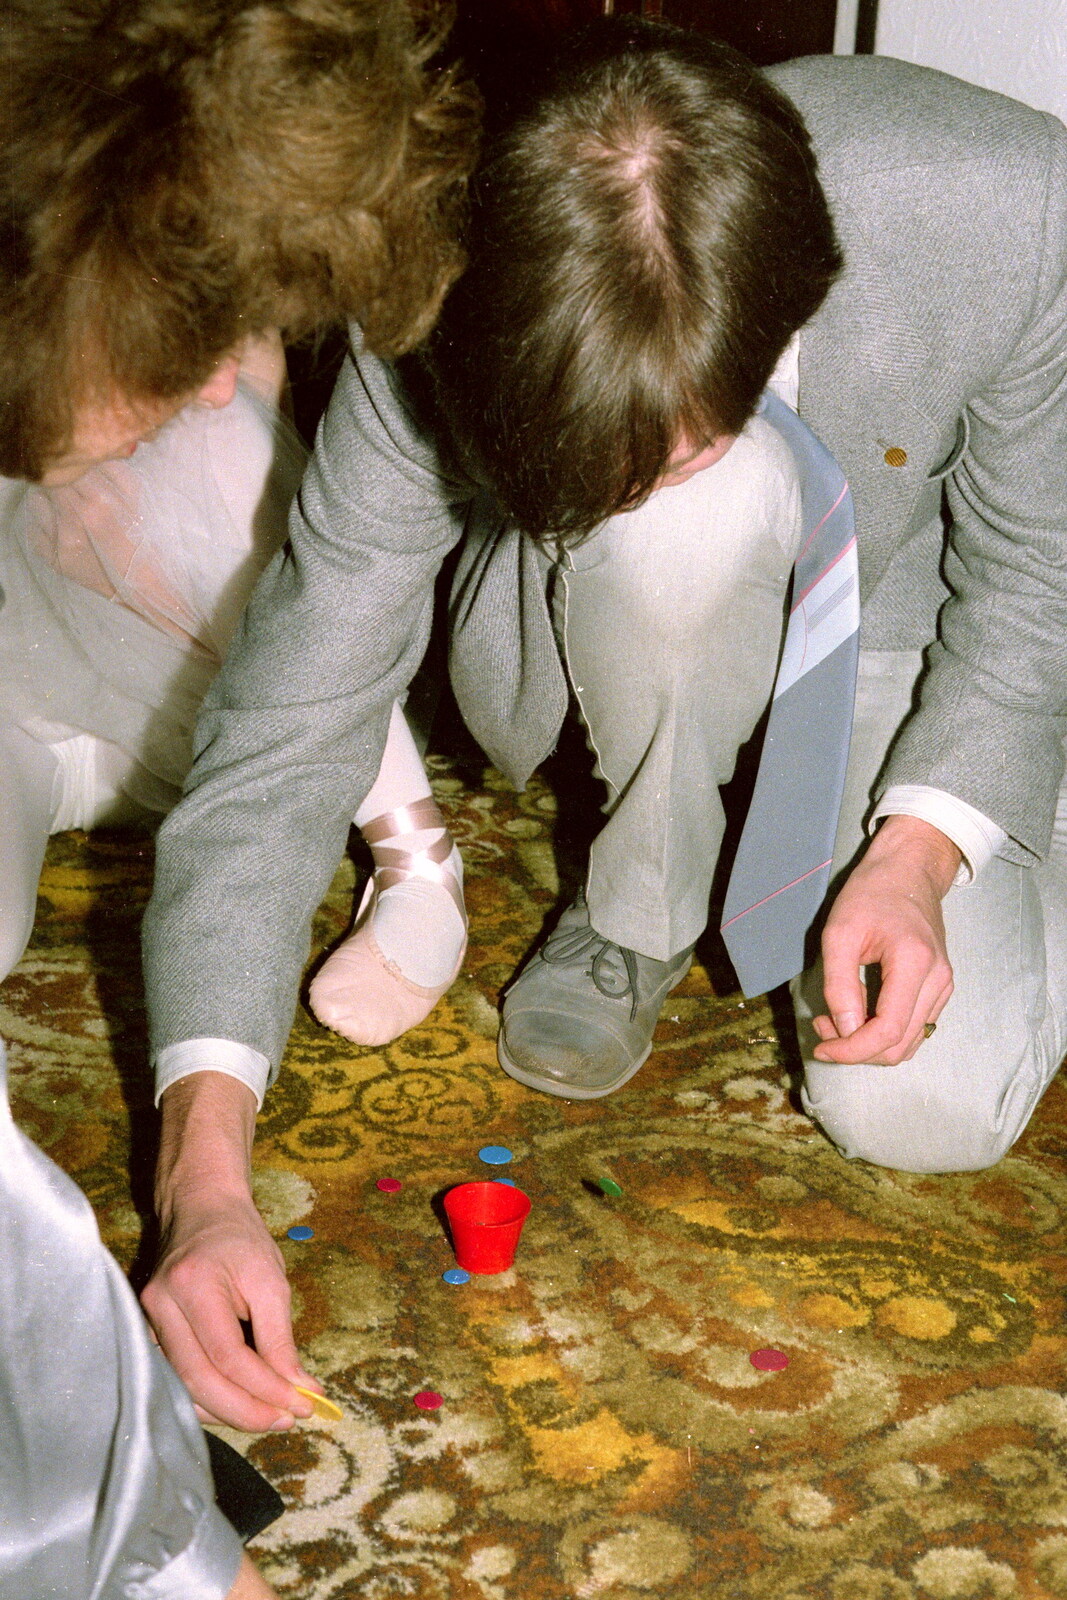 More carpet tiddlywinks action from New Year's Eve at Anna's, Walkford, Dorset - 31st December 1985